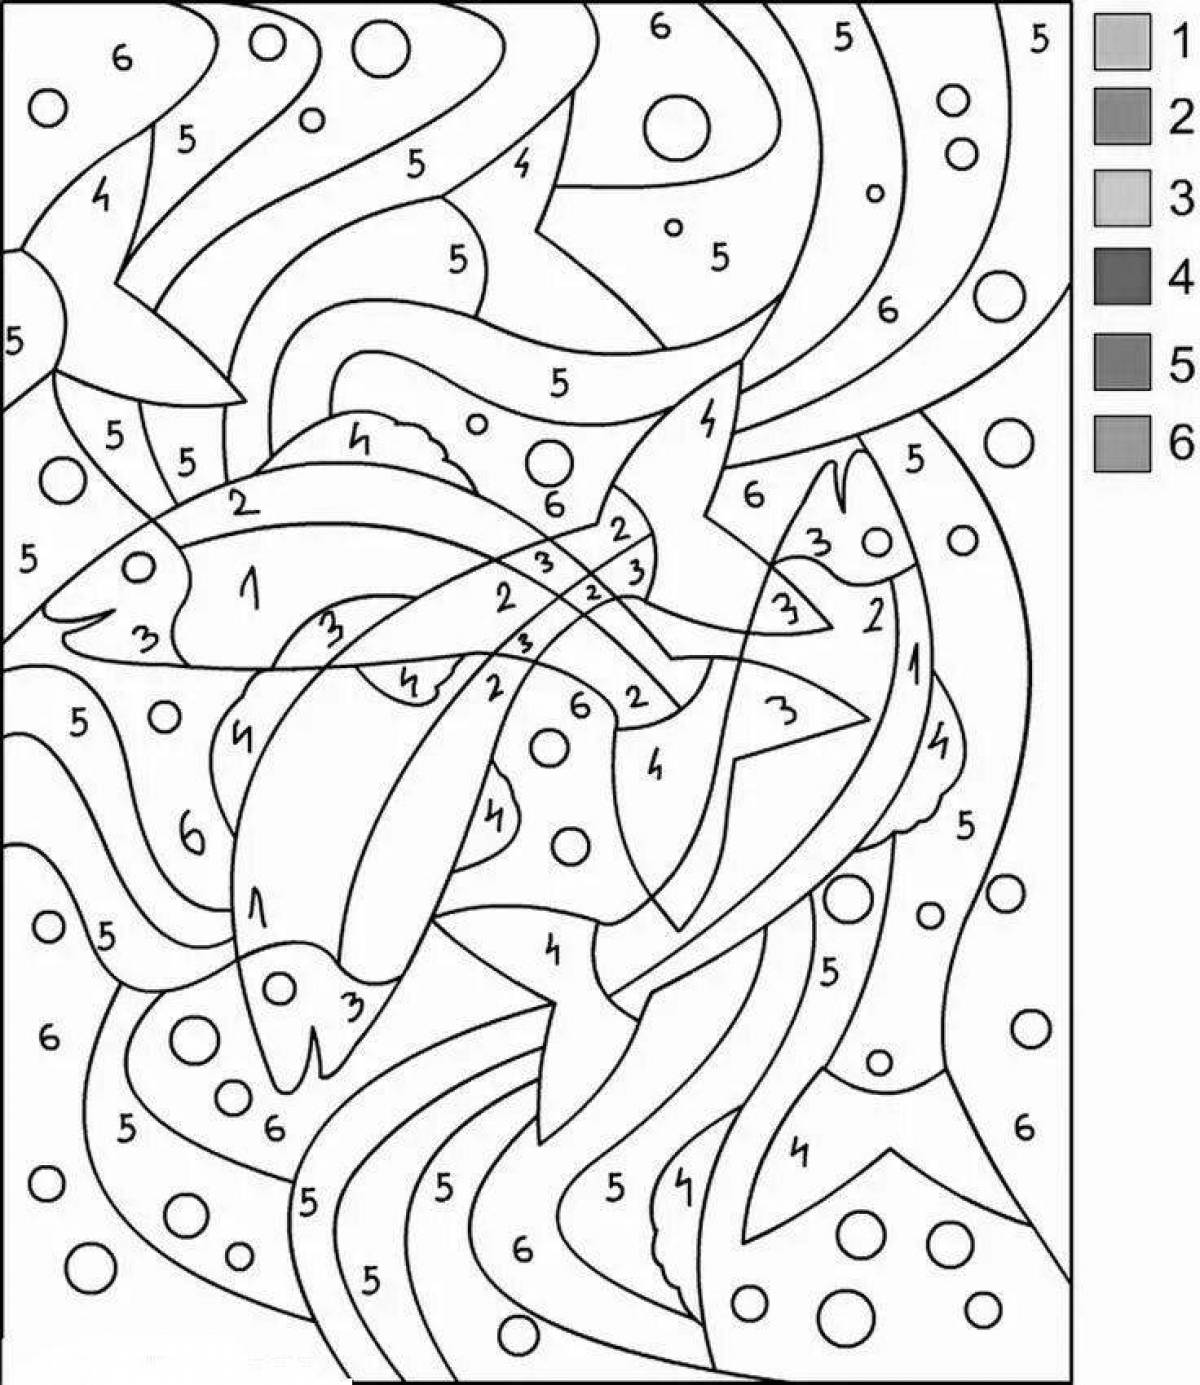 Color-gorgeous coloring page by numbers hack